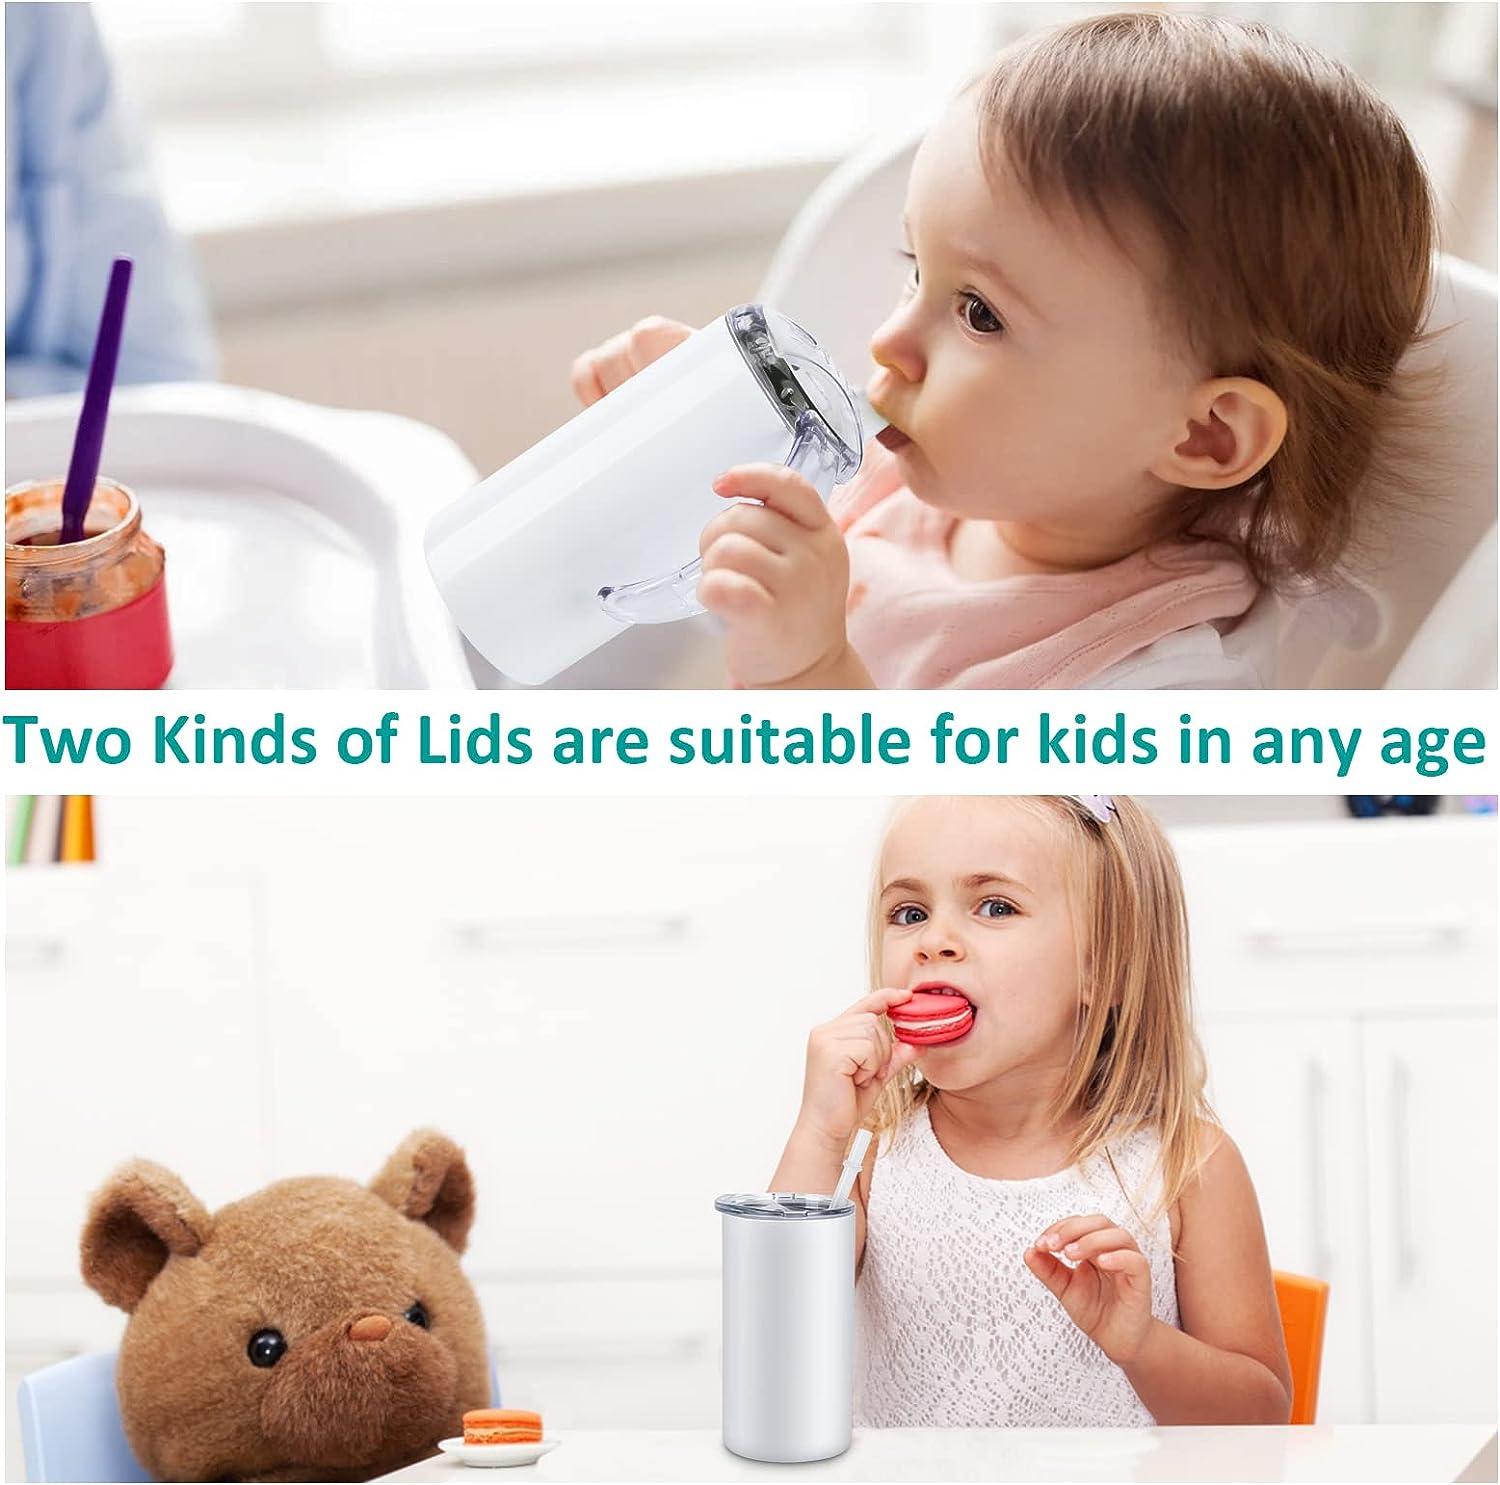 Rommeka Toddler Cups with Straws, 18/8 Stainless Steel Children Smoothie  Drinking Sippy Cups, Stacki…See more Rommeka Toddler Cups with Straws, 18/8